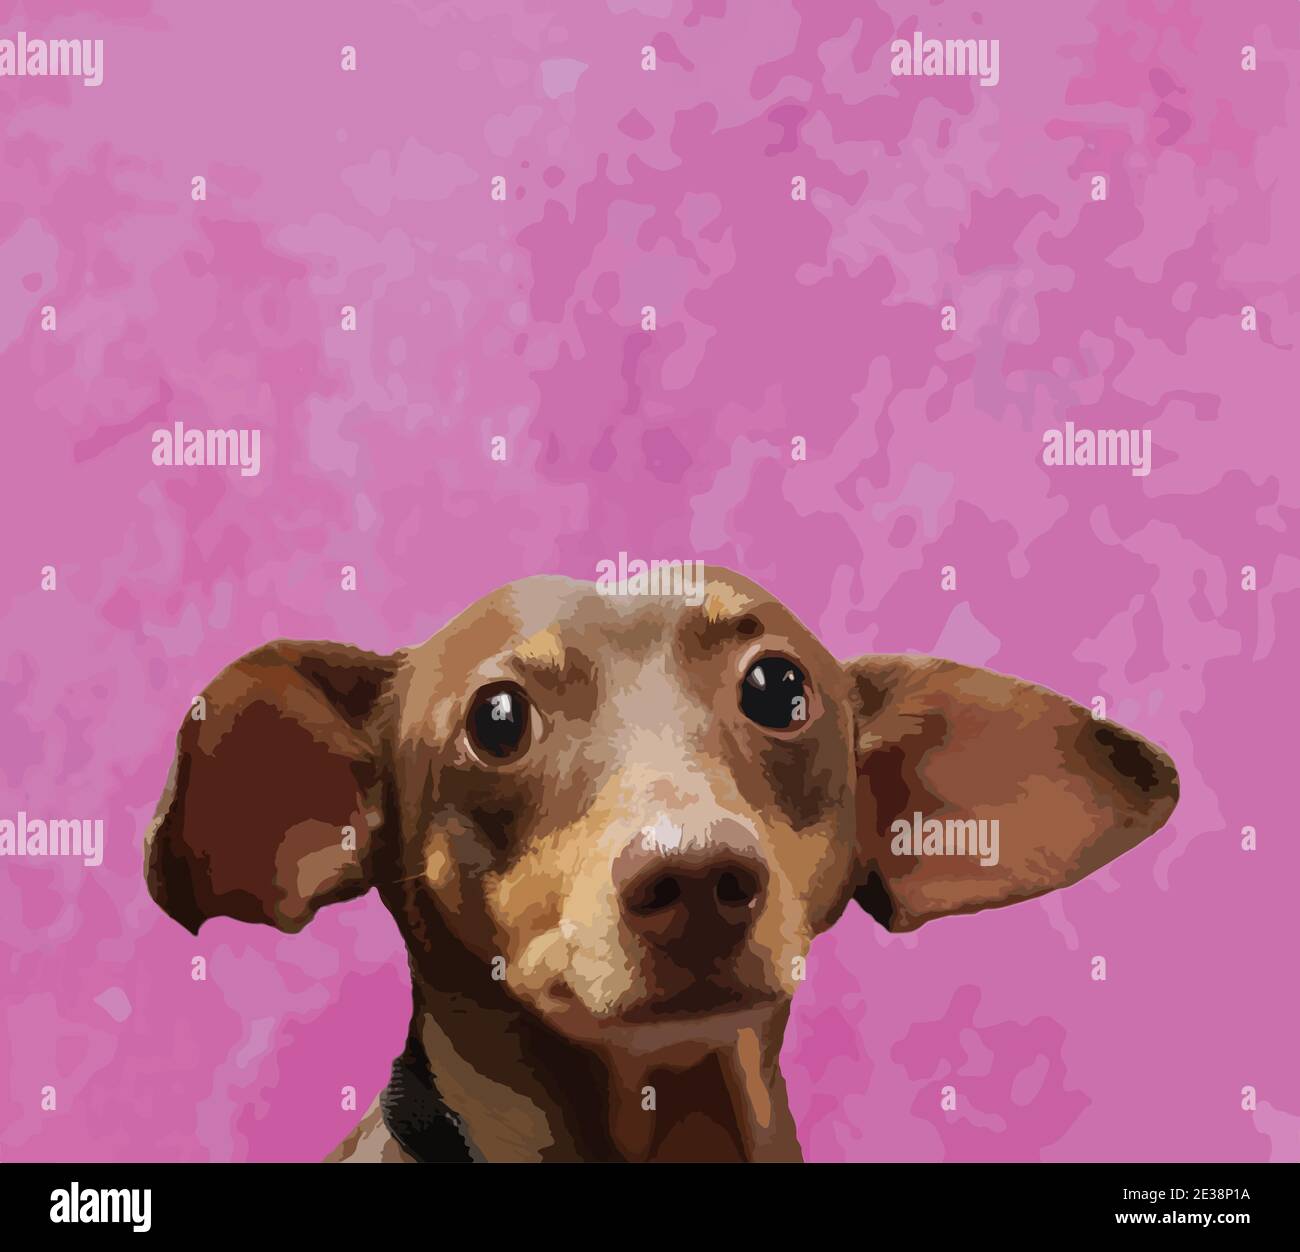 Happy smiling dachshund dog on a pink and purple background. Stock Vector